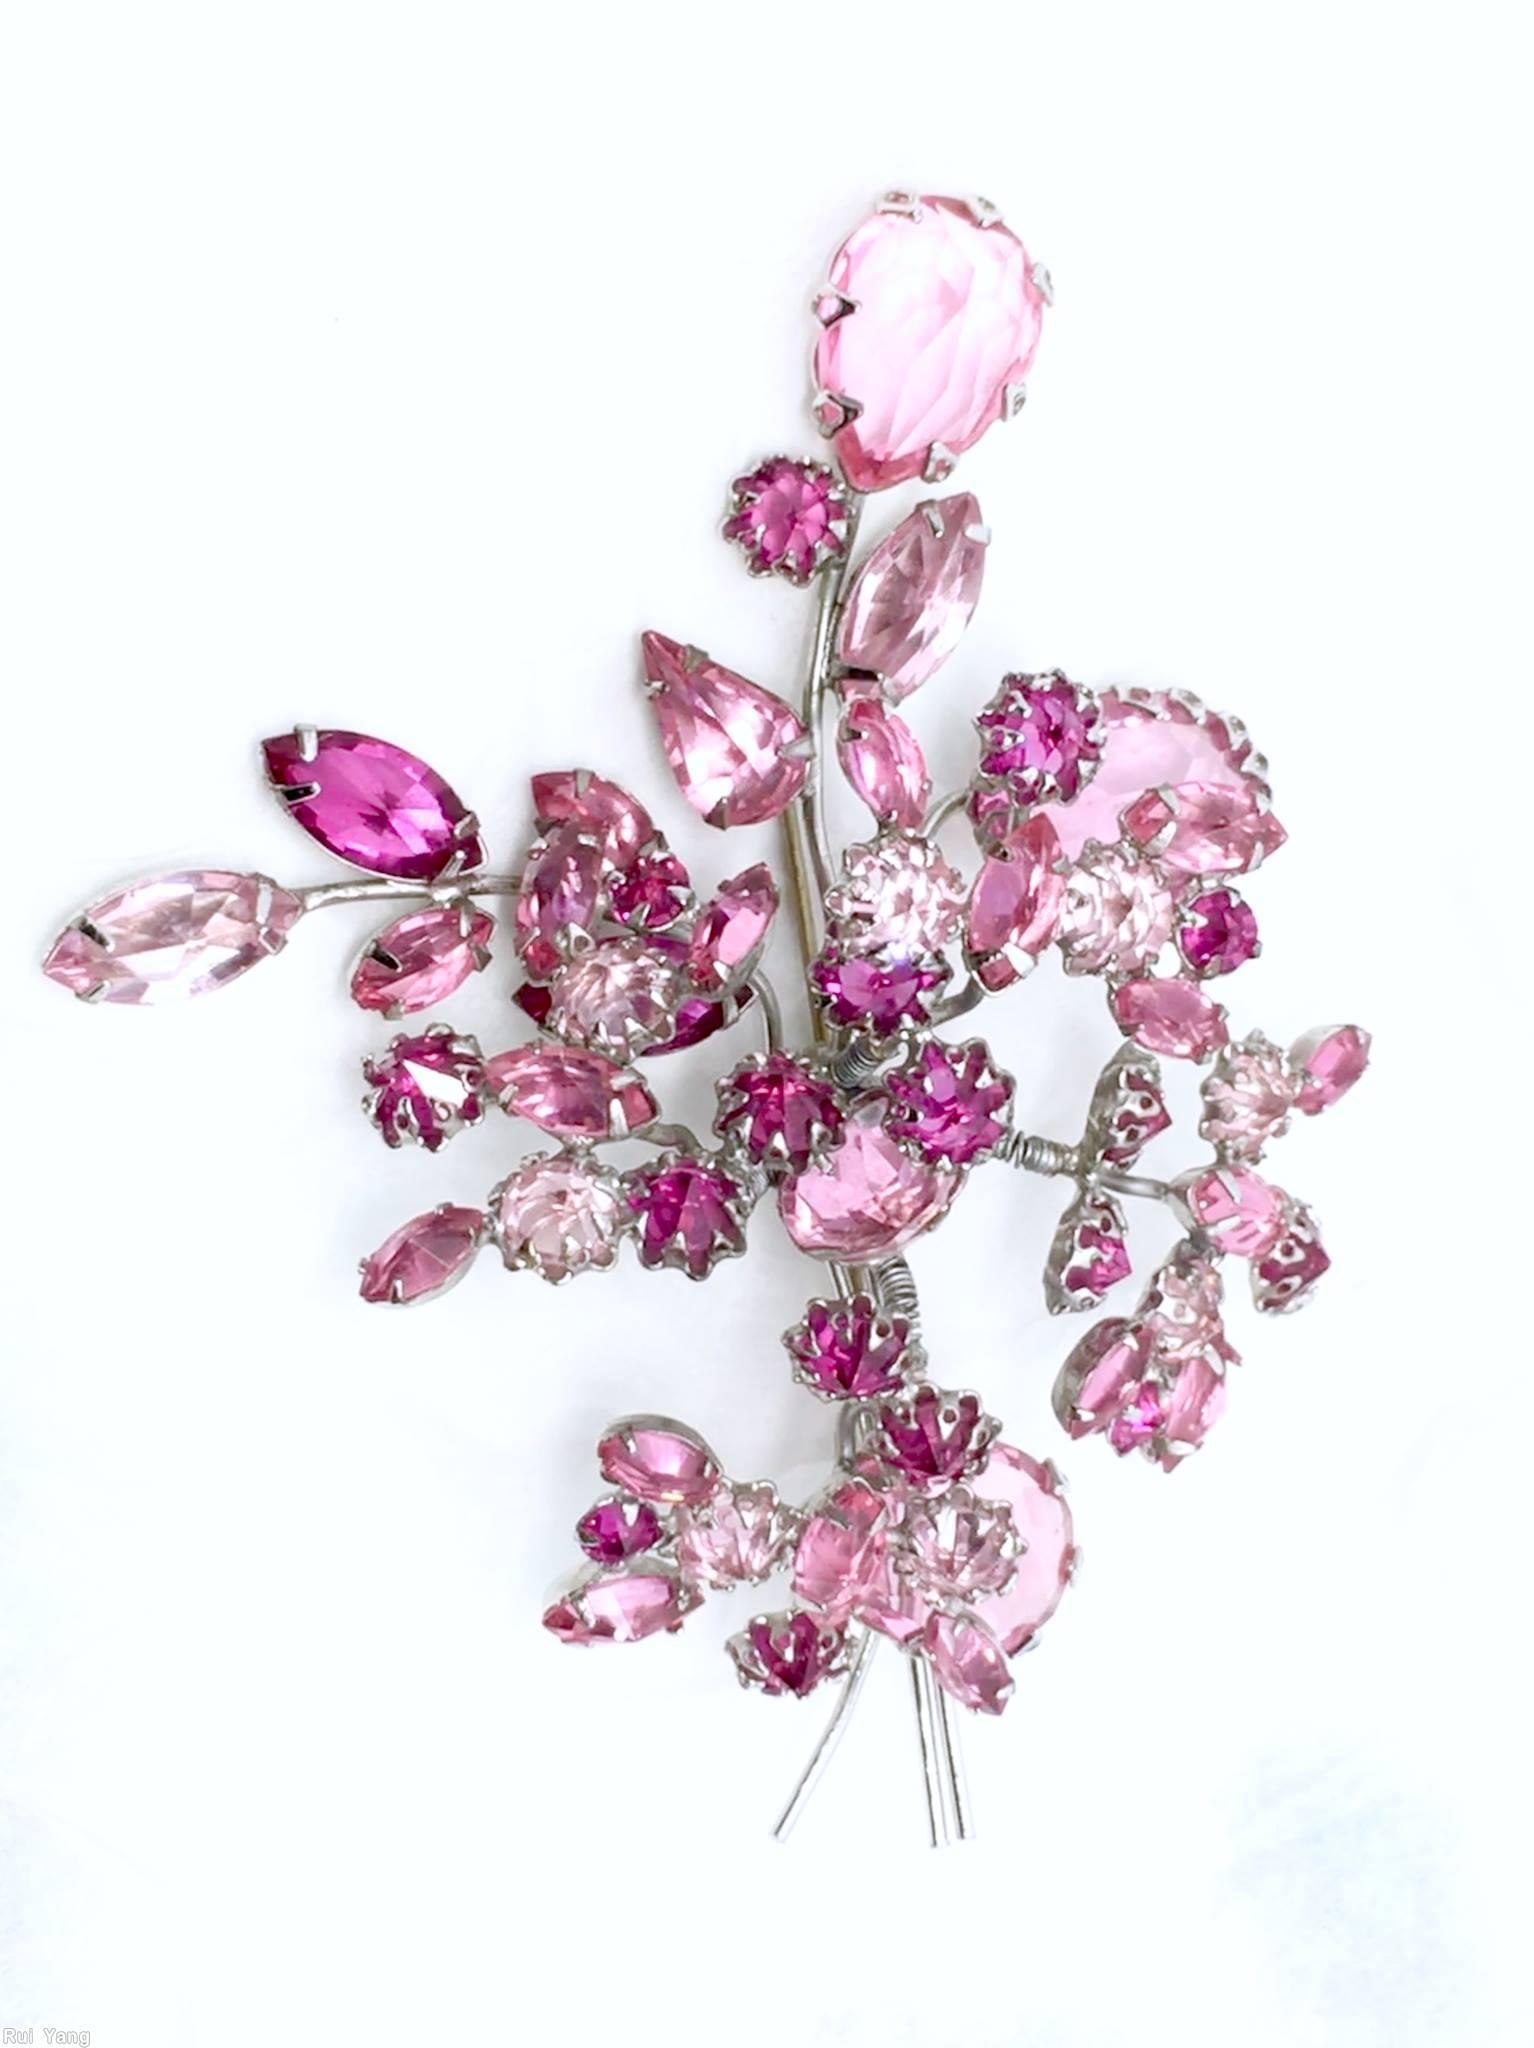 Schreiner 2 trembler flower 3 branch bunch pin 1 large teardrop 2 large oval cab pink large open back faceted teardrop fuchsia silvertone navette chaton jewelry